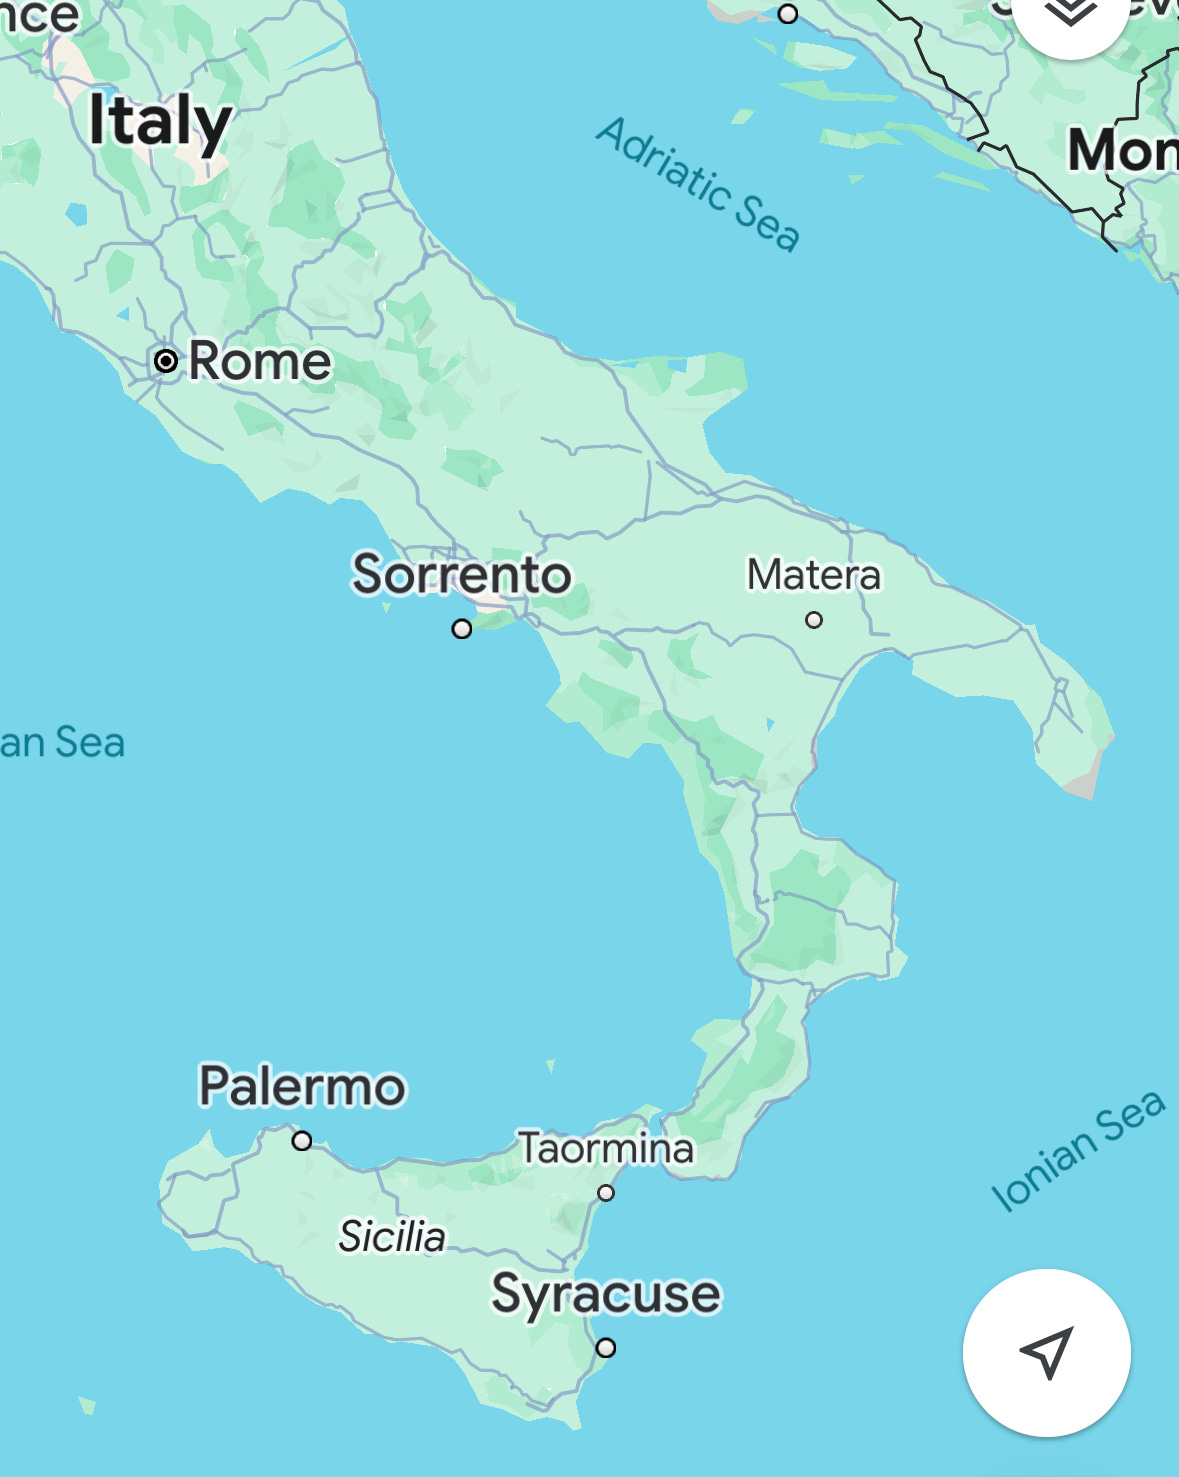 Image shows a map of Italy with Syracuse, Sicily marked.